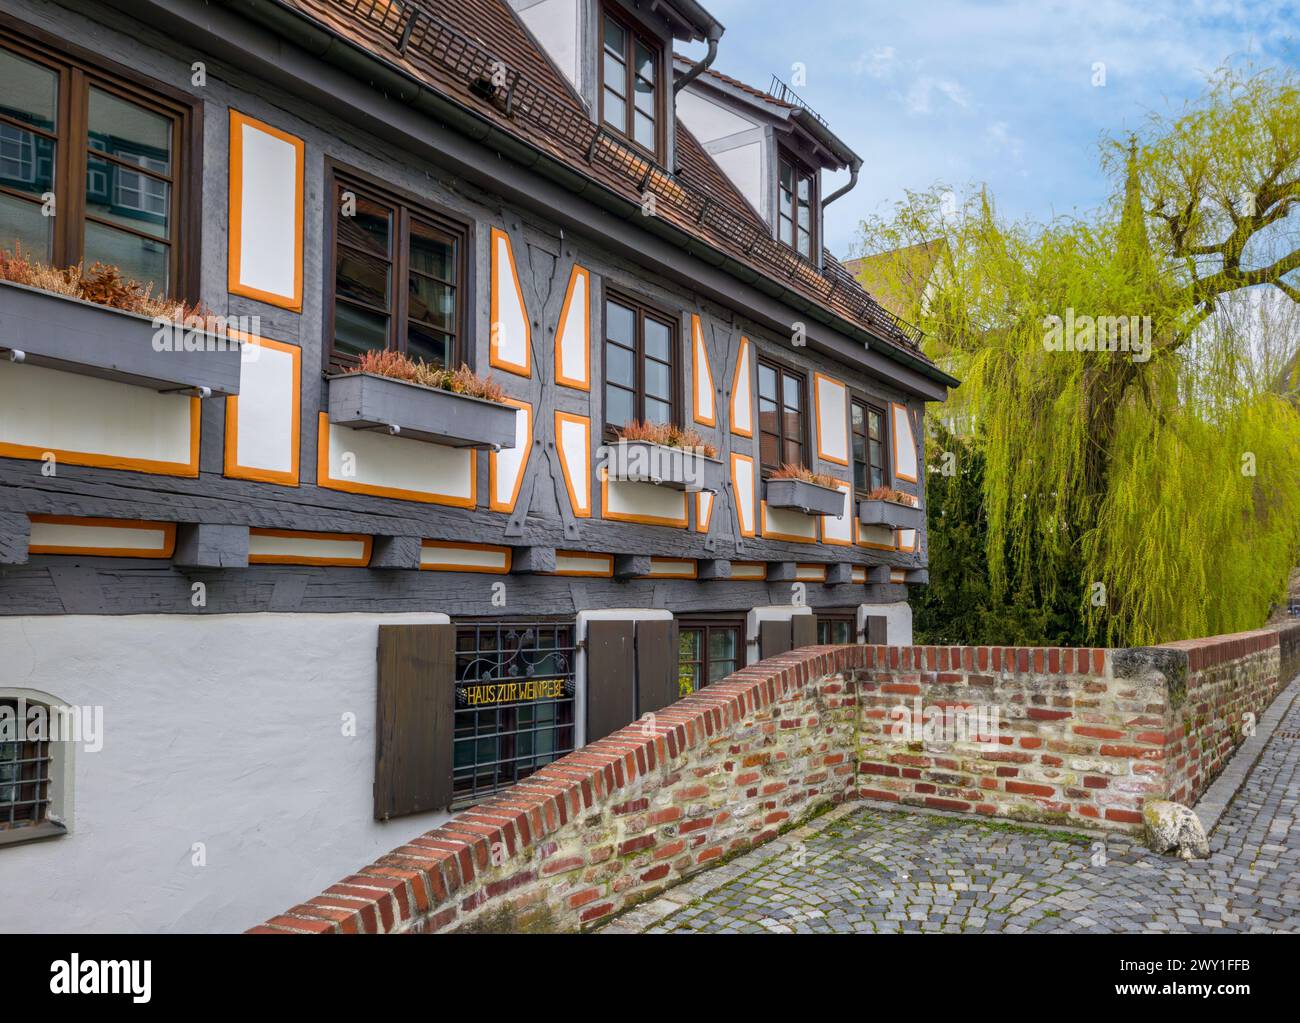 Old half-timbered houses in the Fischerviertel, Ulm, Baden-Württemberg, Germany Stock Photo